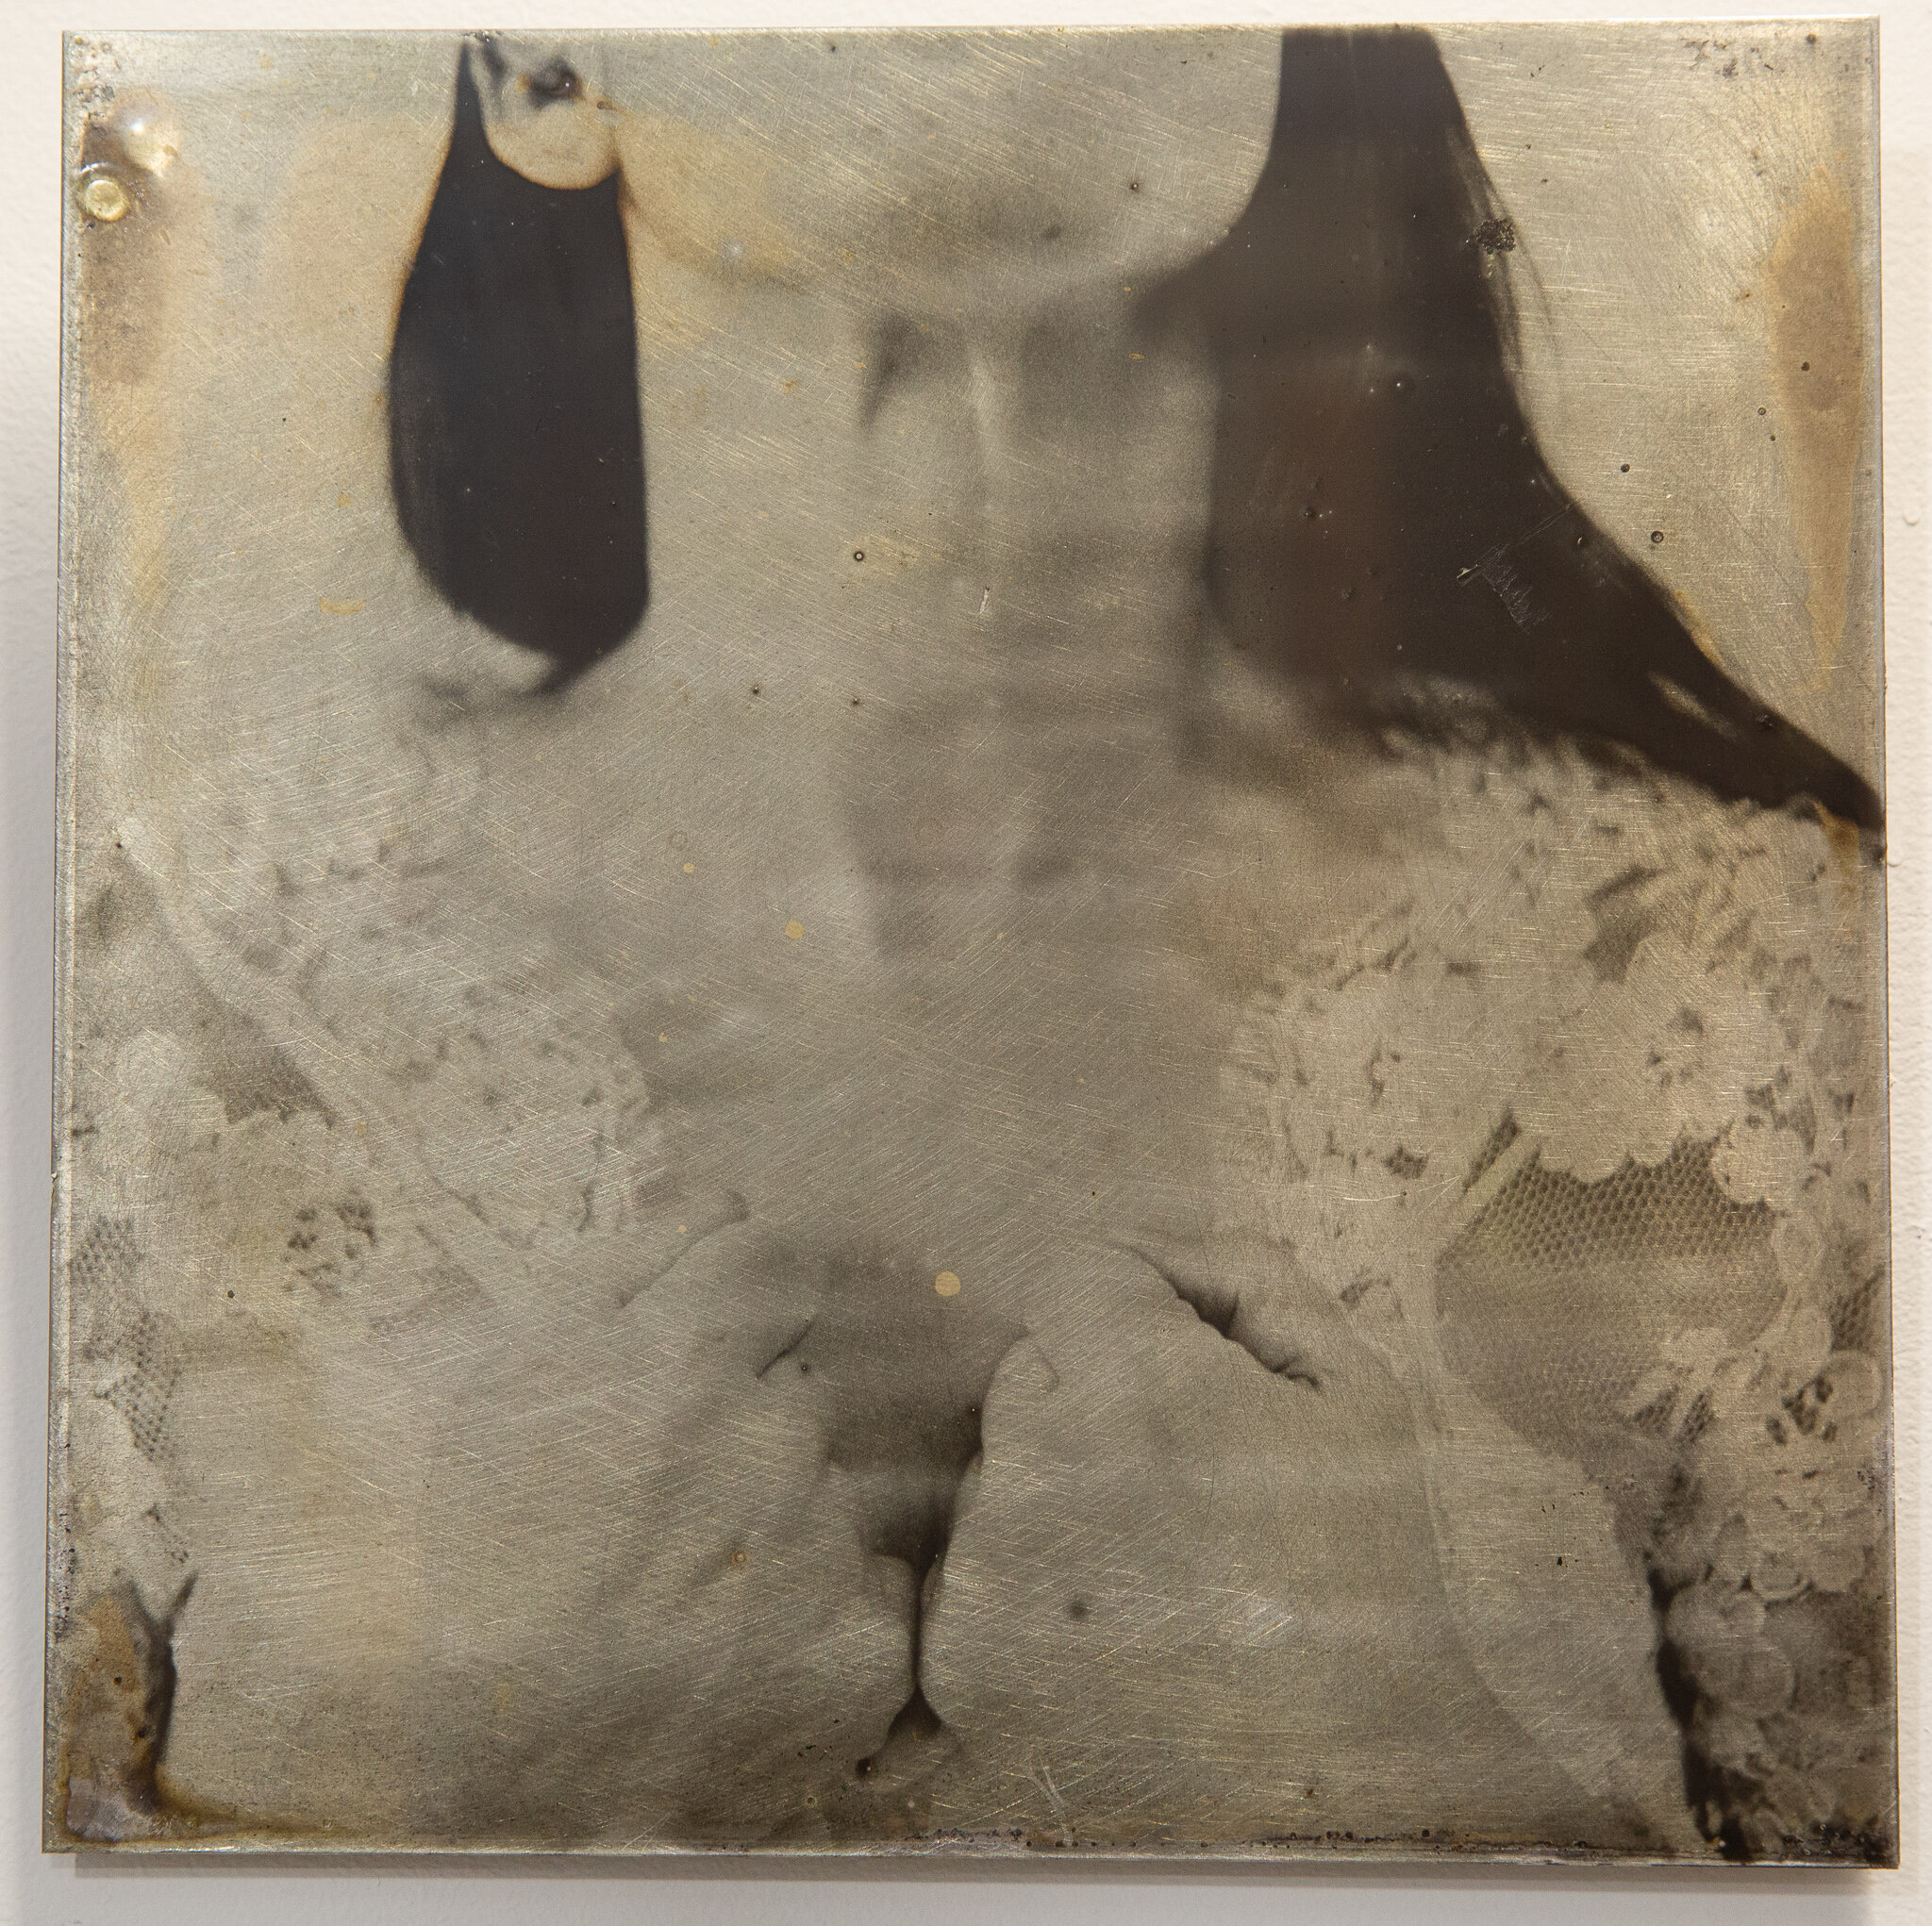   Untitled (photograph from the void) , 2020 Liquid emulsion on found steel plates, 12x12 inches 